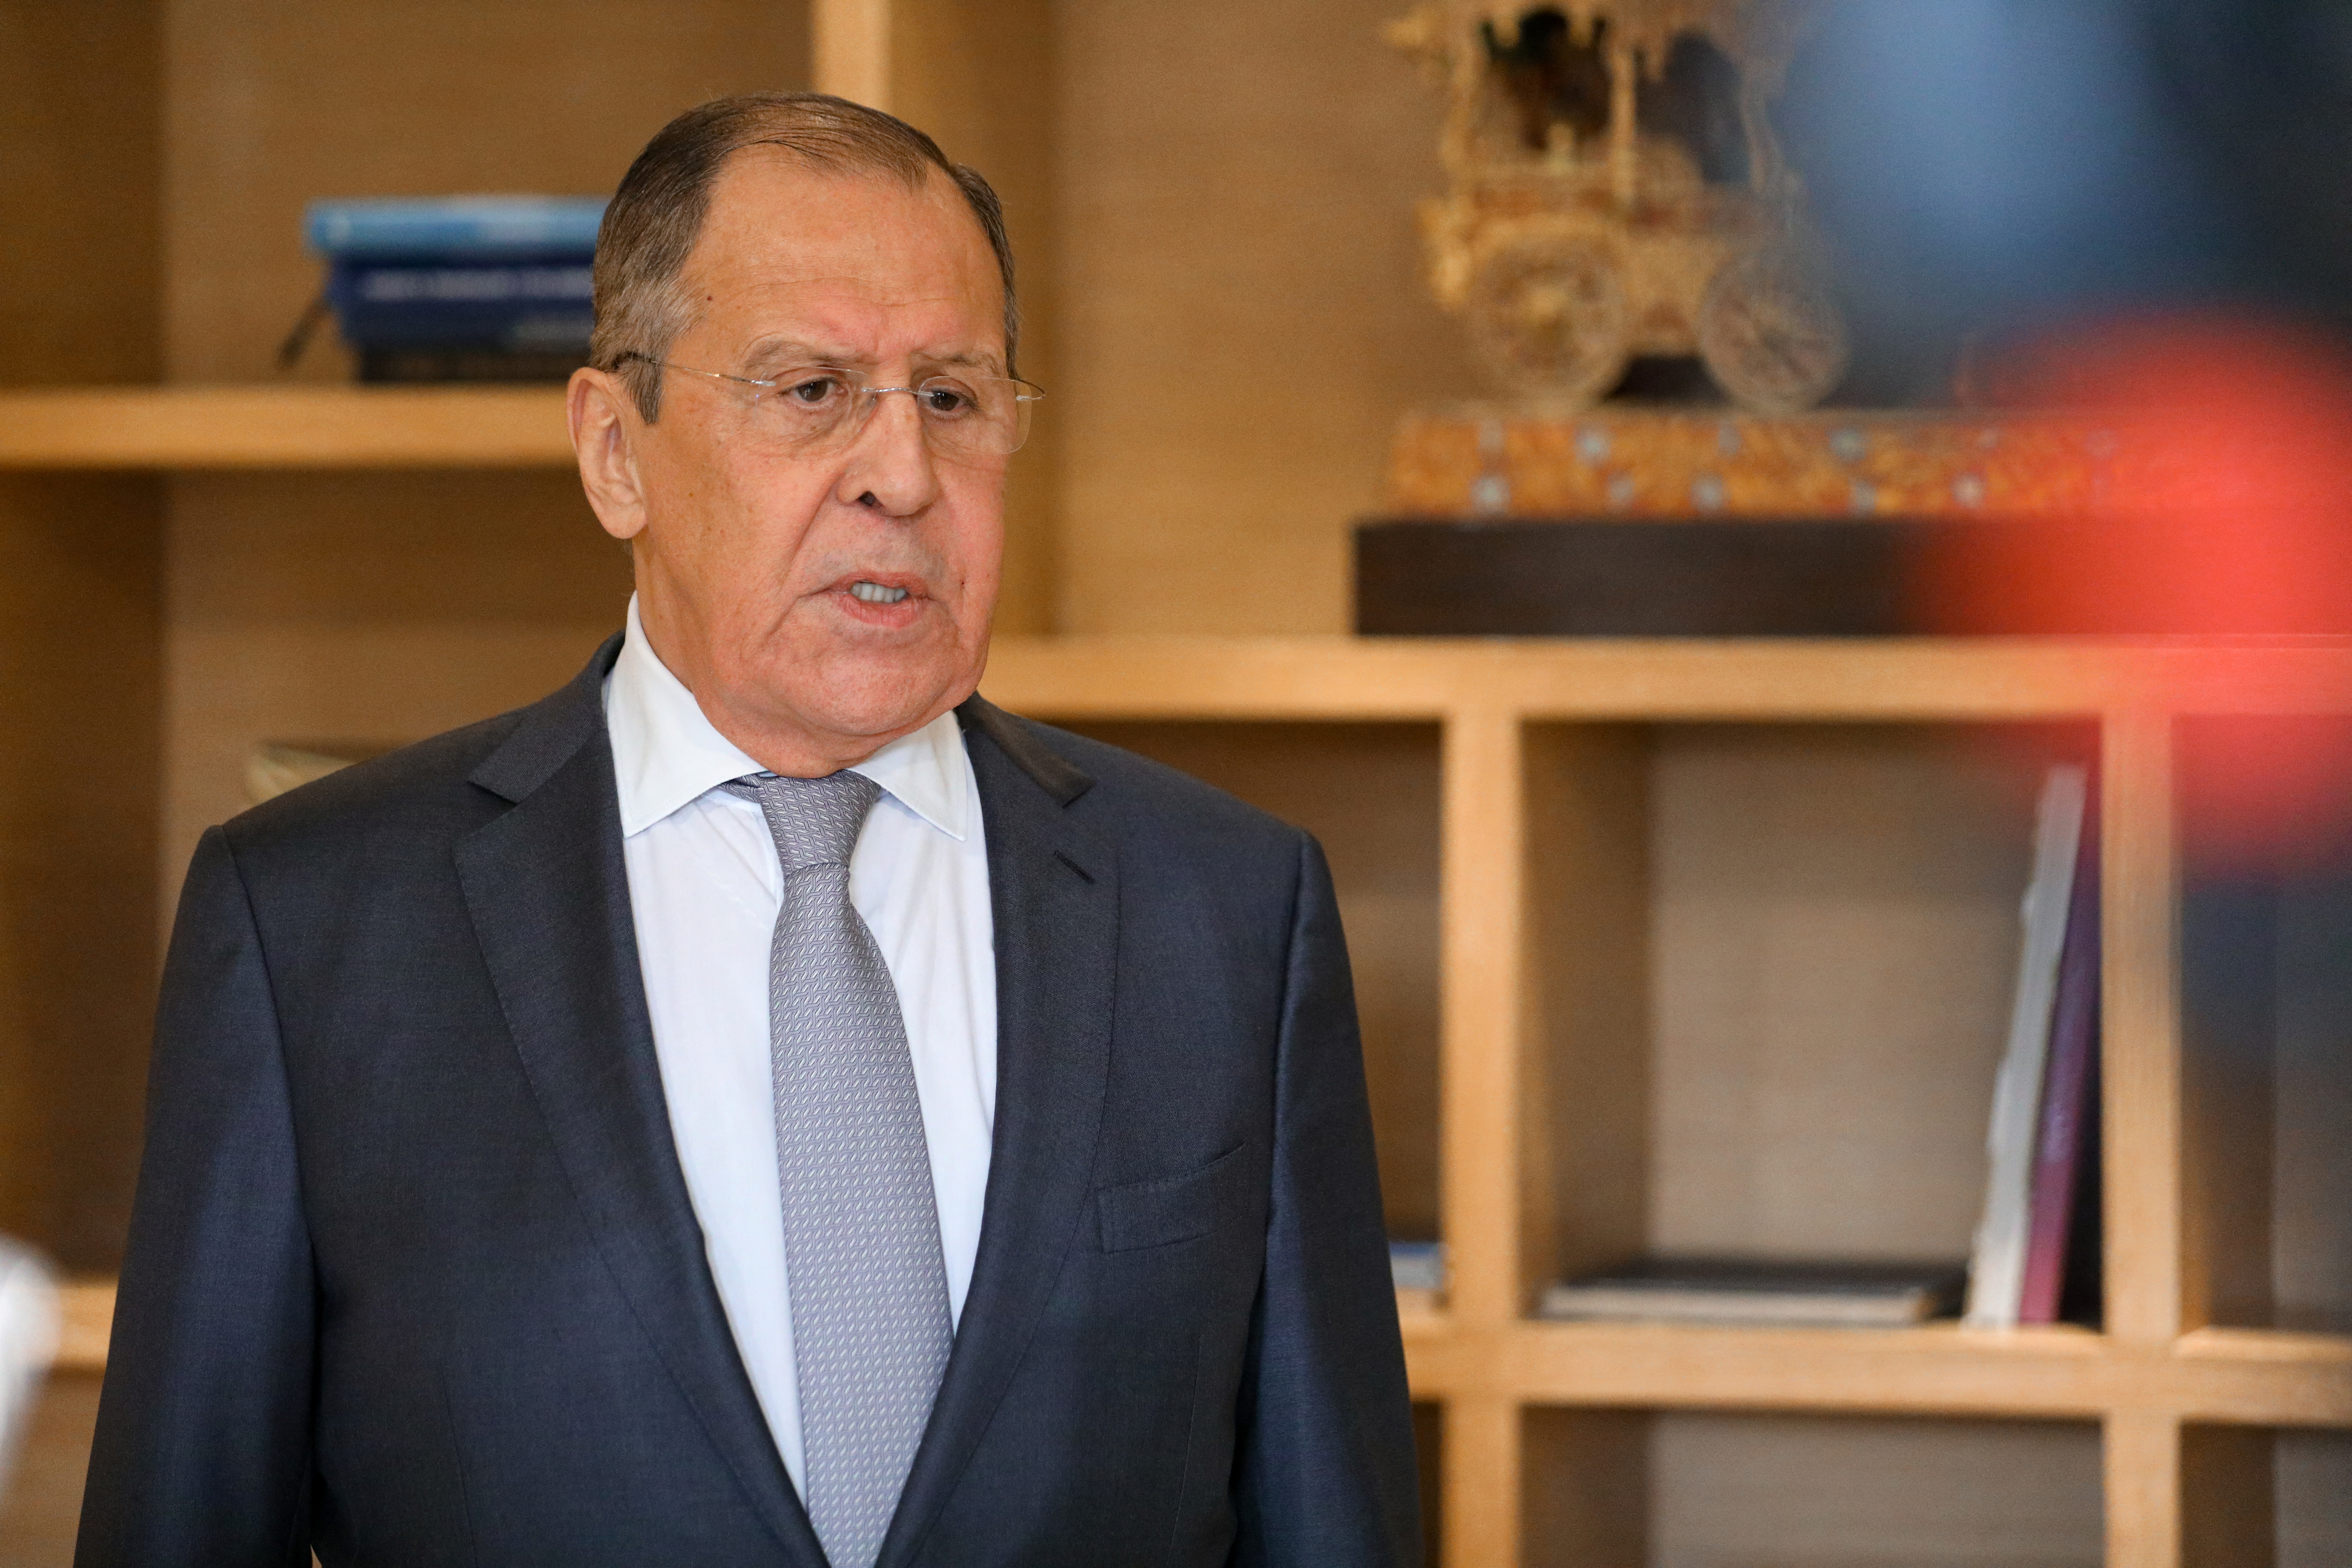 Russia's Foreign Minister Lavrov speaks with the media in New Delhi